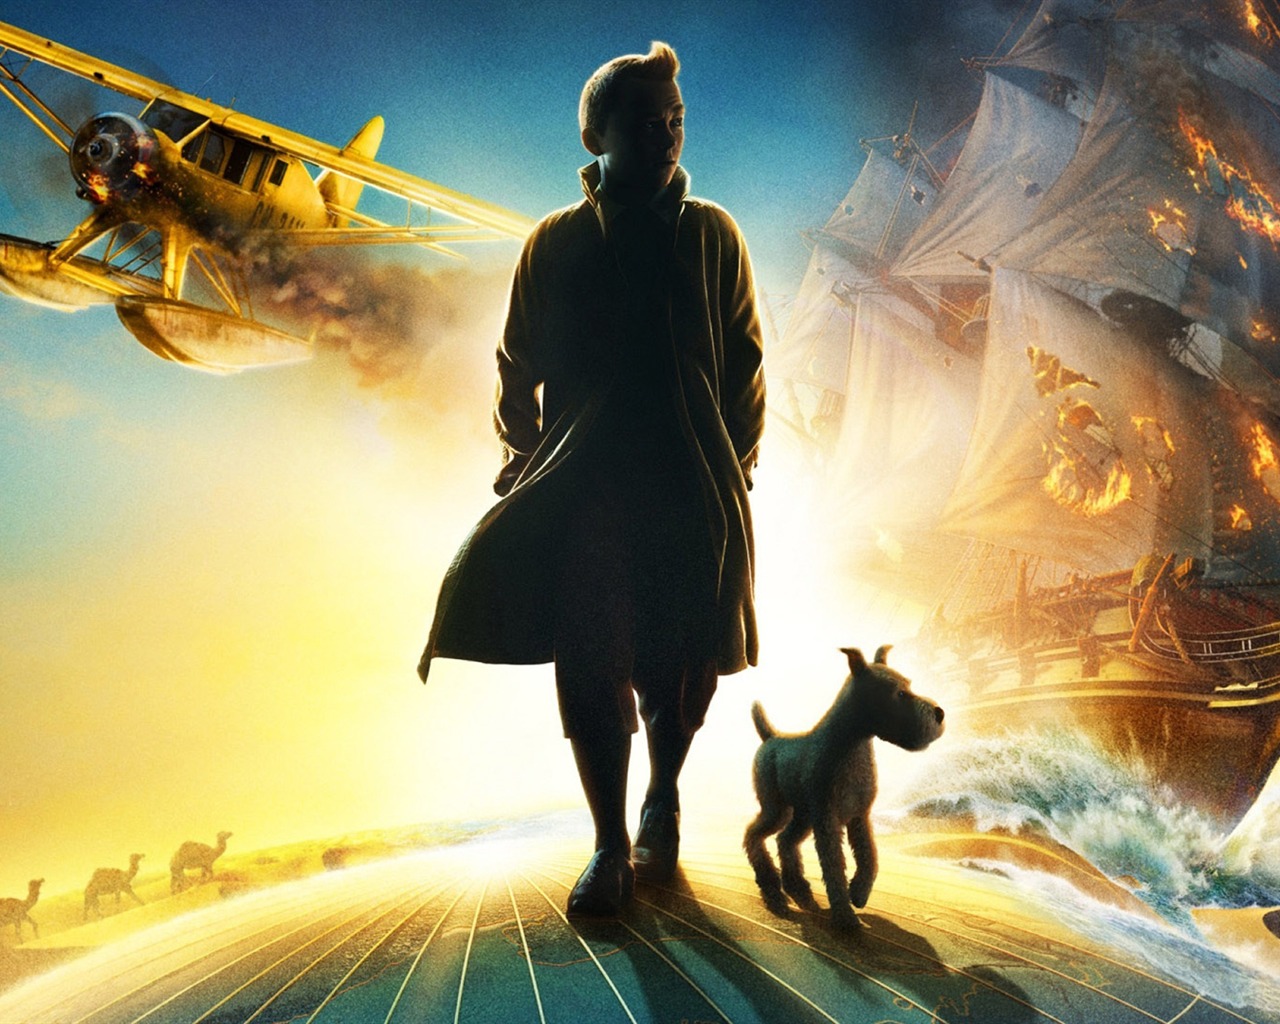 The Adventures of Tintin HD wallpapers #1 - 1280x1024